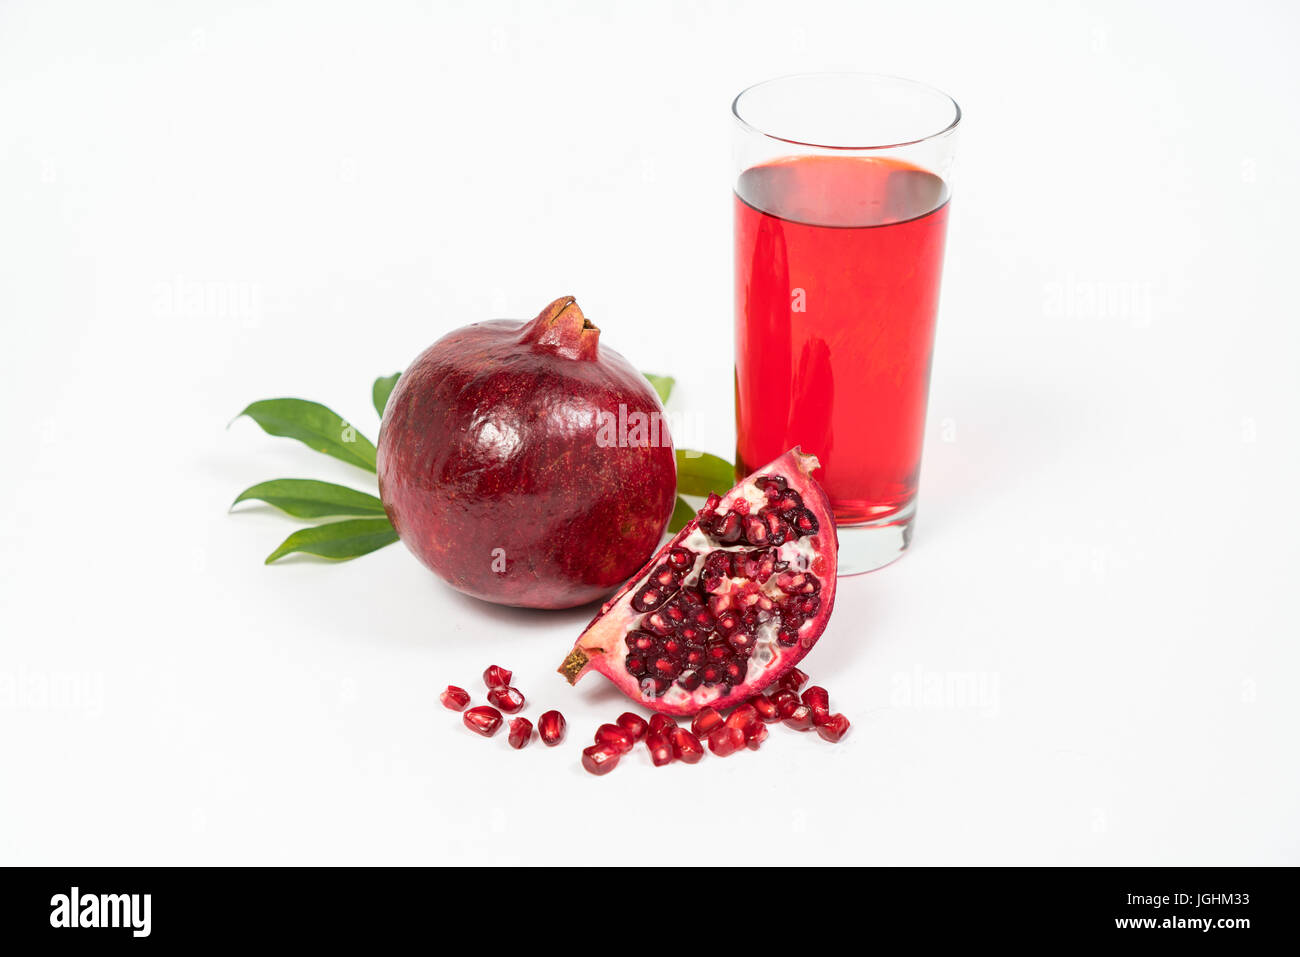 Fresh Pomegranate sliced with seeds and glass of juice on isolated white background Stock Photo